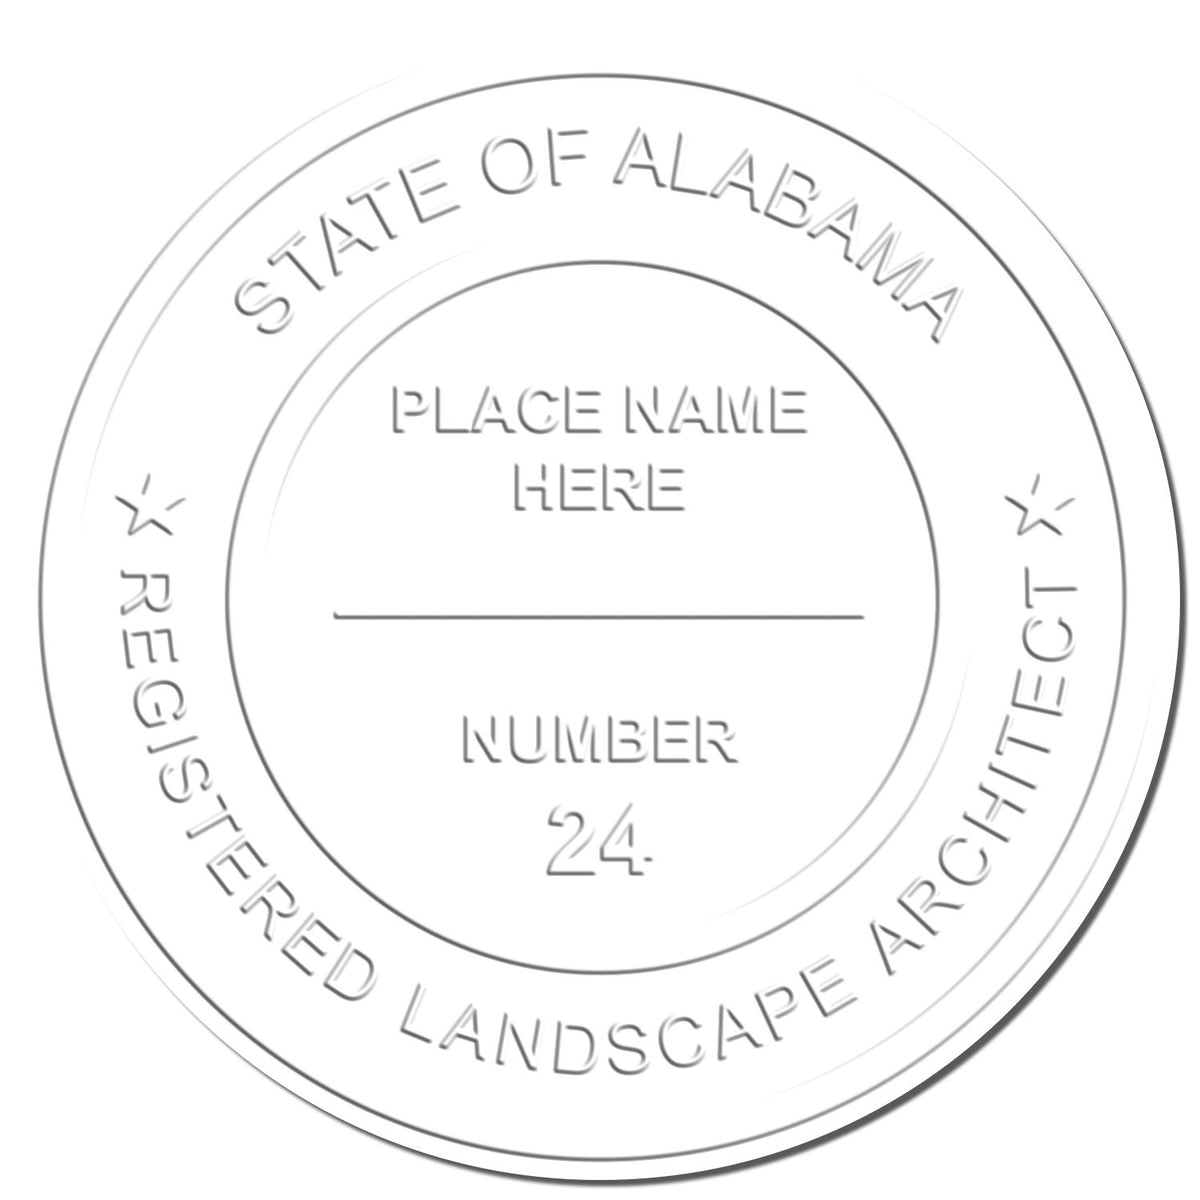 This paper is stamped with a sample imprint of the Gift Alabama Landscape Architect Seal, signifying its quality and reliability.